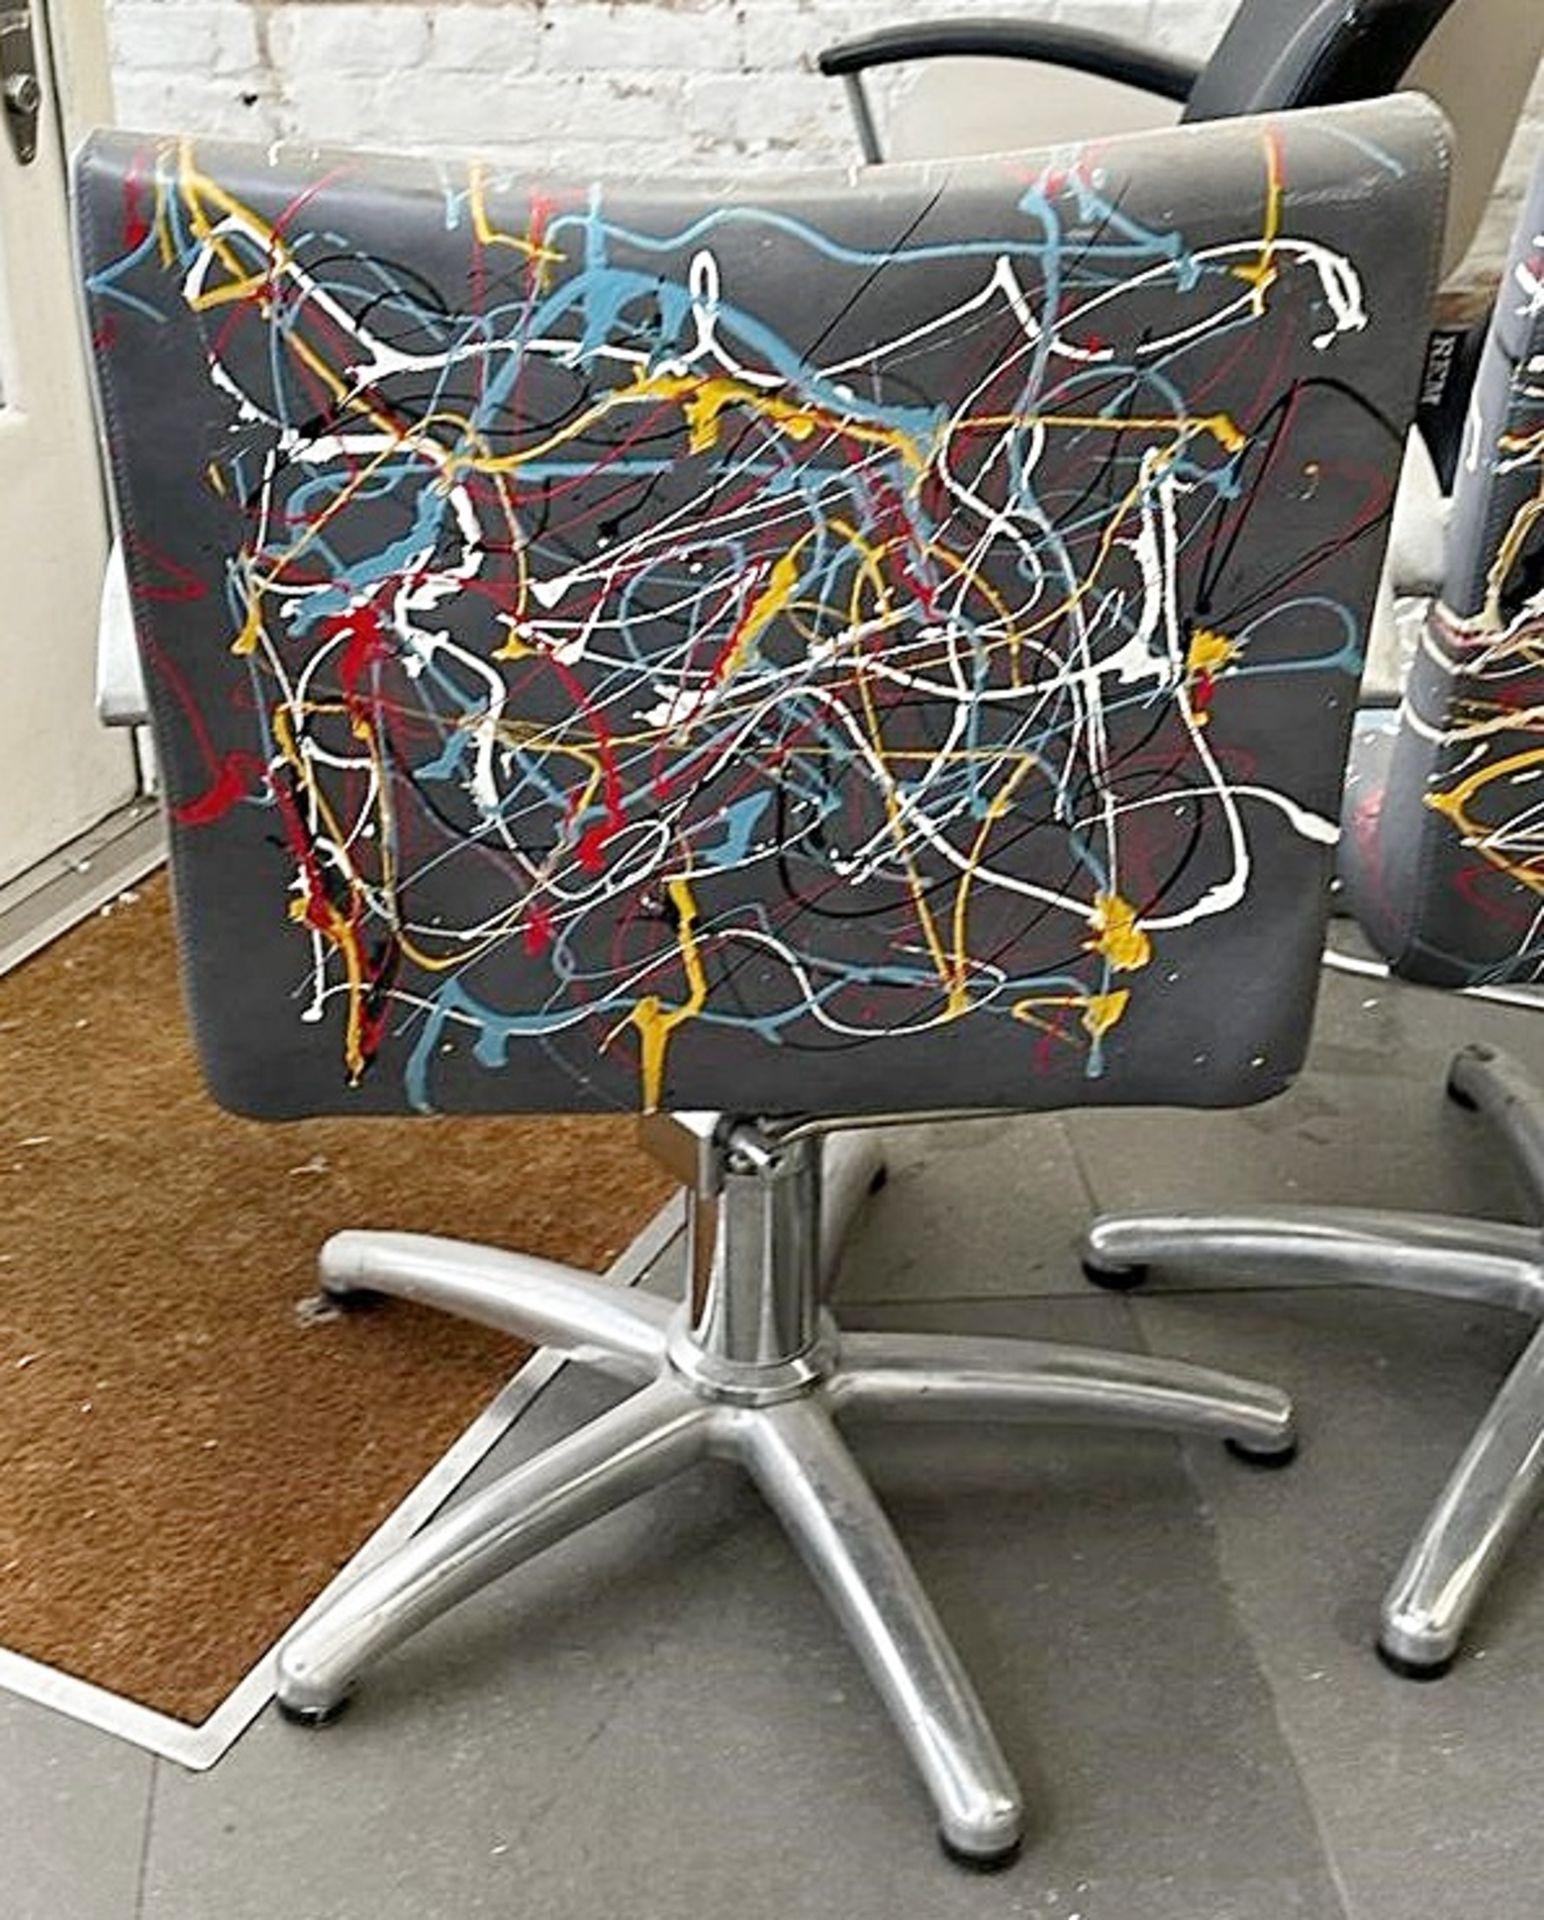 1 x REM Leather Stylist Chair Featuring Especially Commissioned Abstract Paintwork By A Renowned - Image 4 of 6